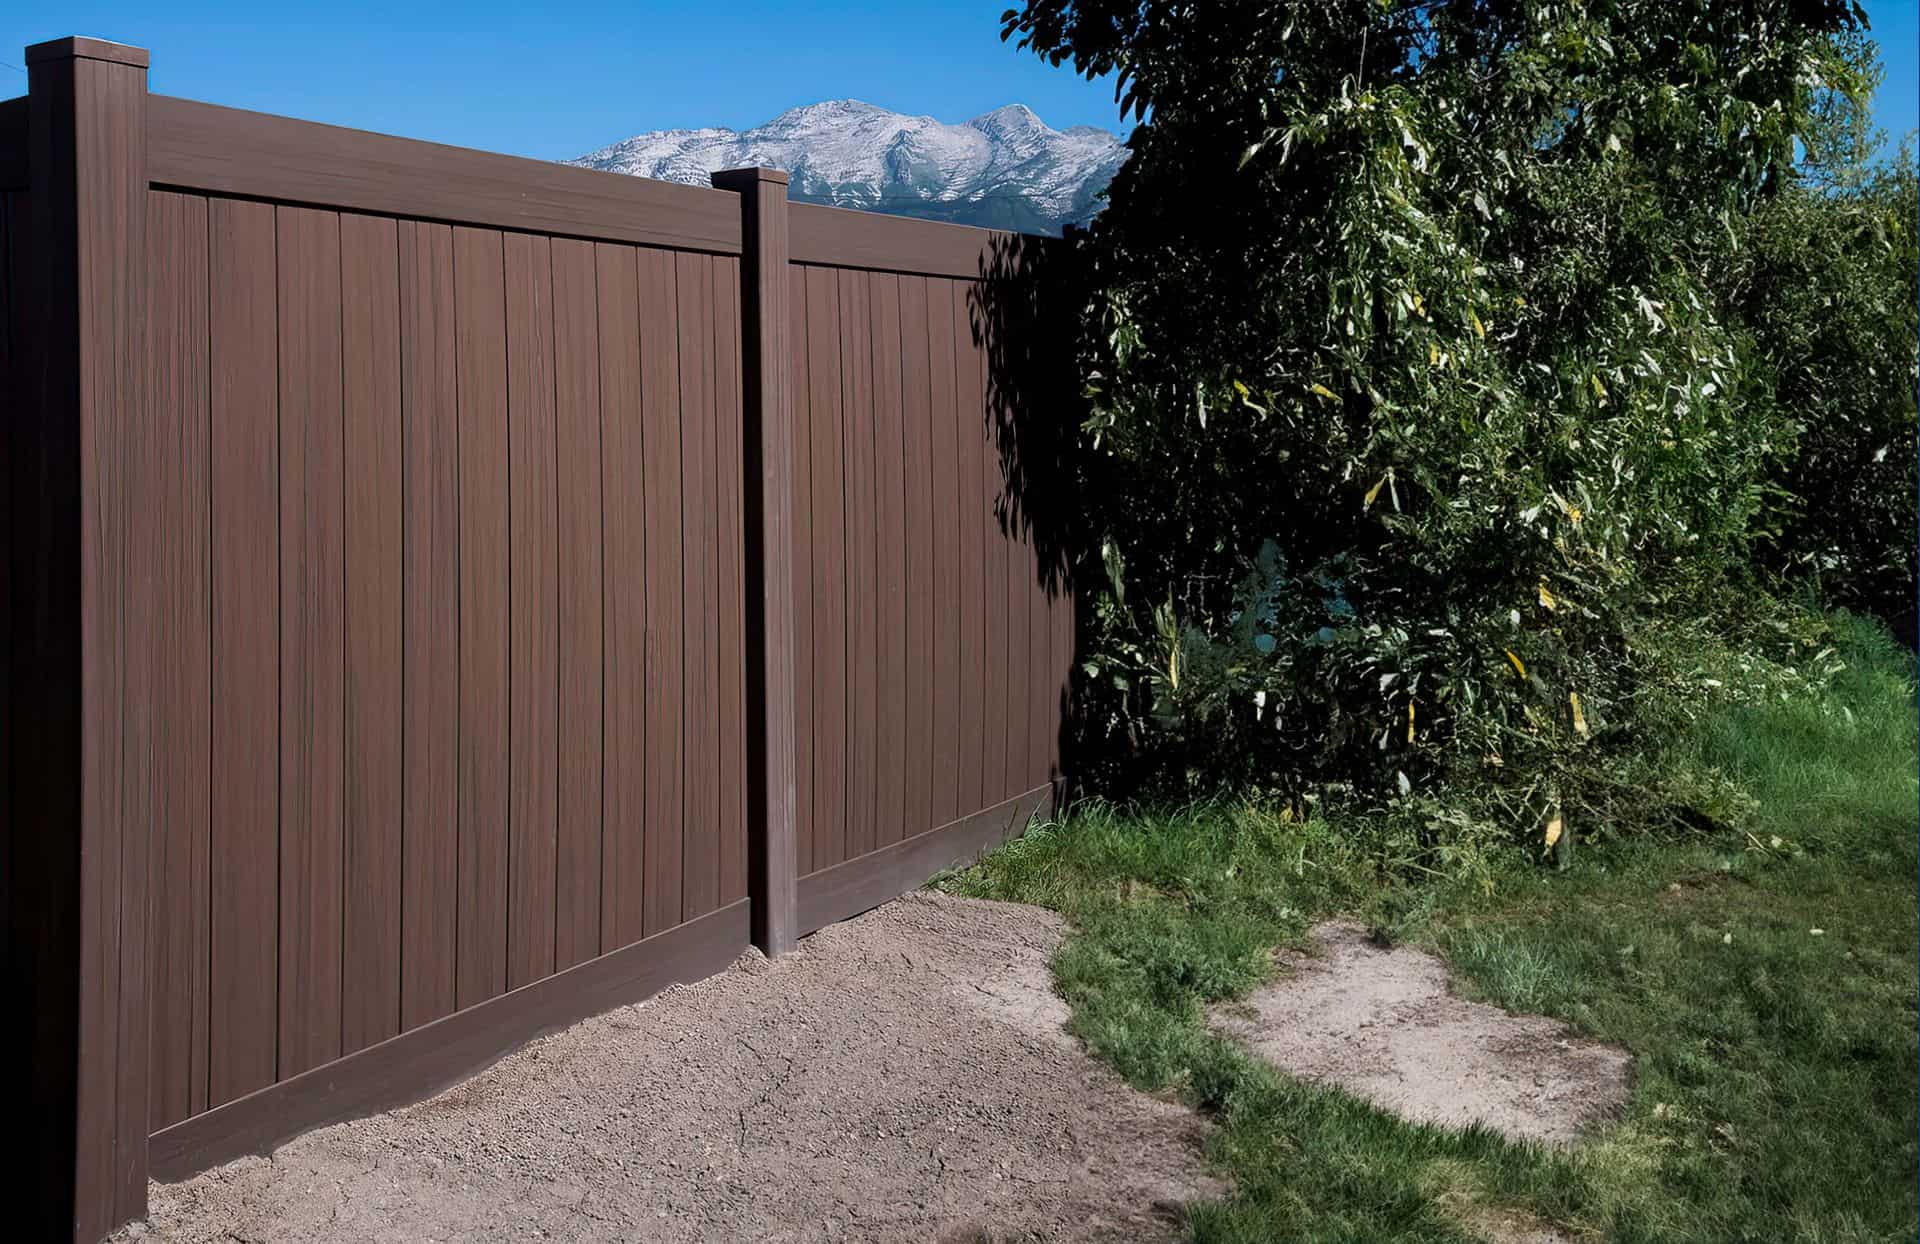 Dark sequoia vinyl fence with vertical slats behind large tree and grassy lawn, with dirt walkway.